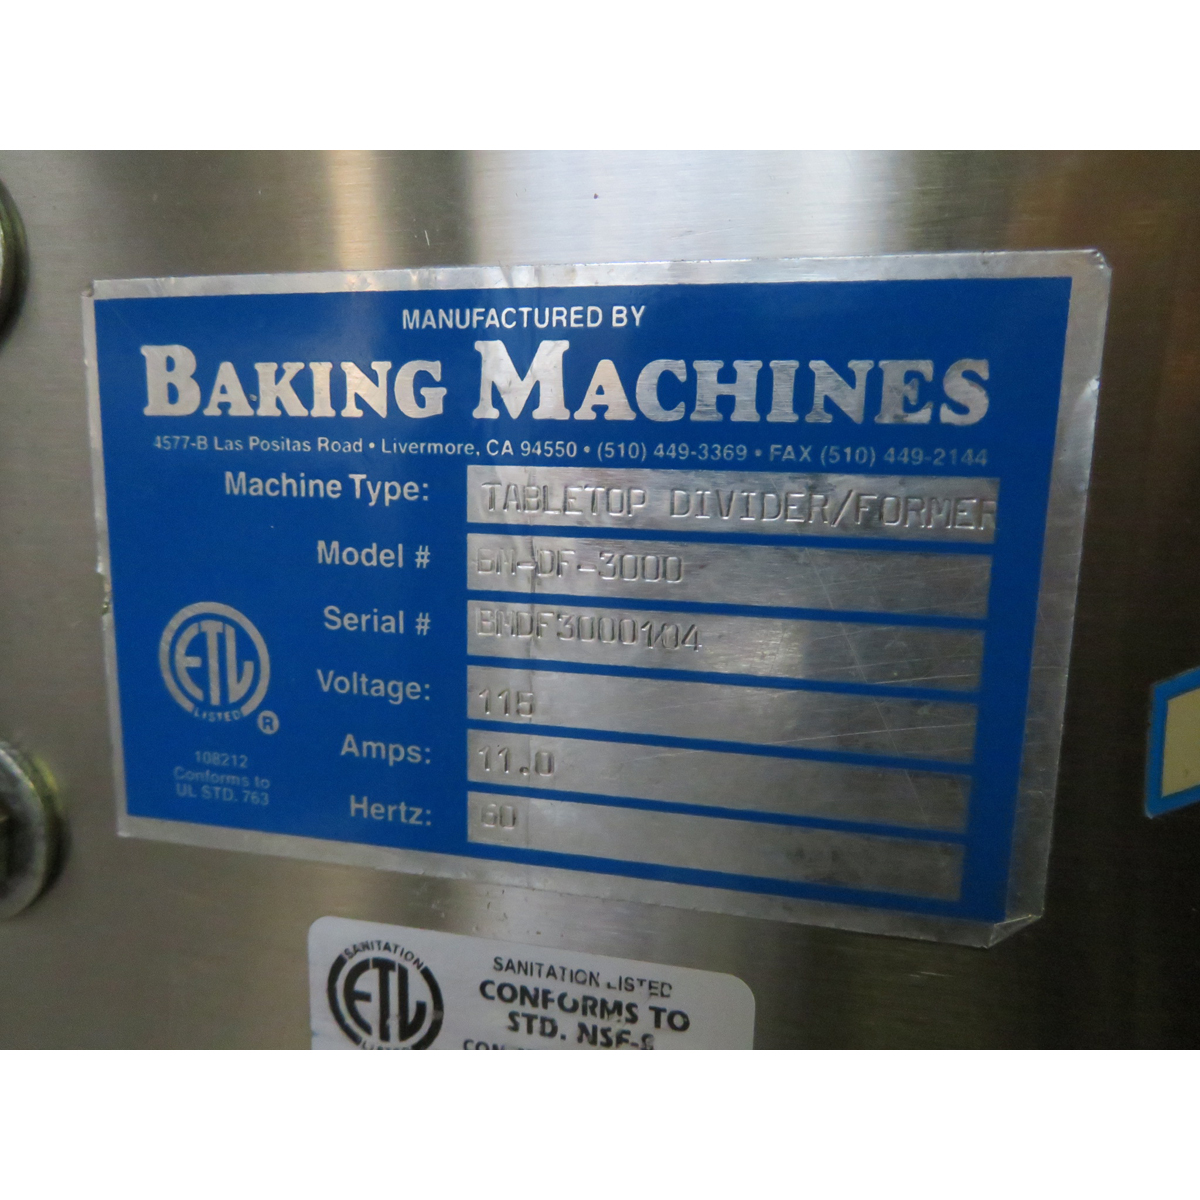 Baking Machines BM-DF-3000 Bagel Divider and Former, Used Excellent Condition image 13